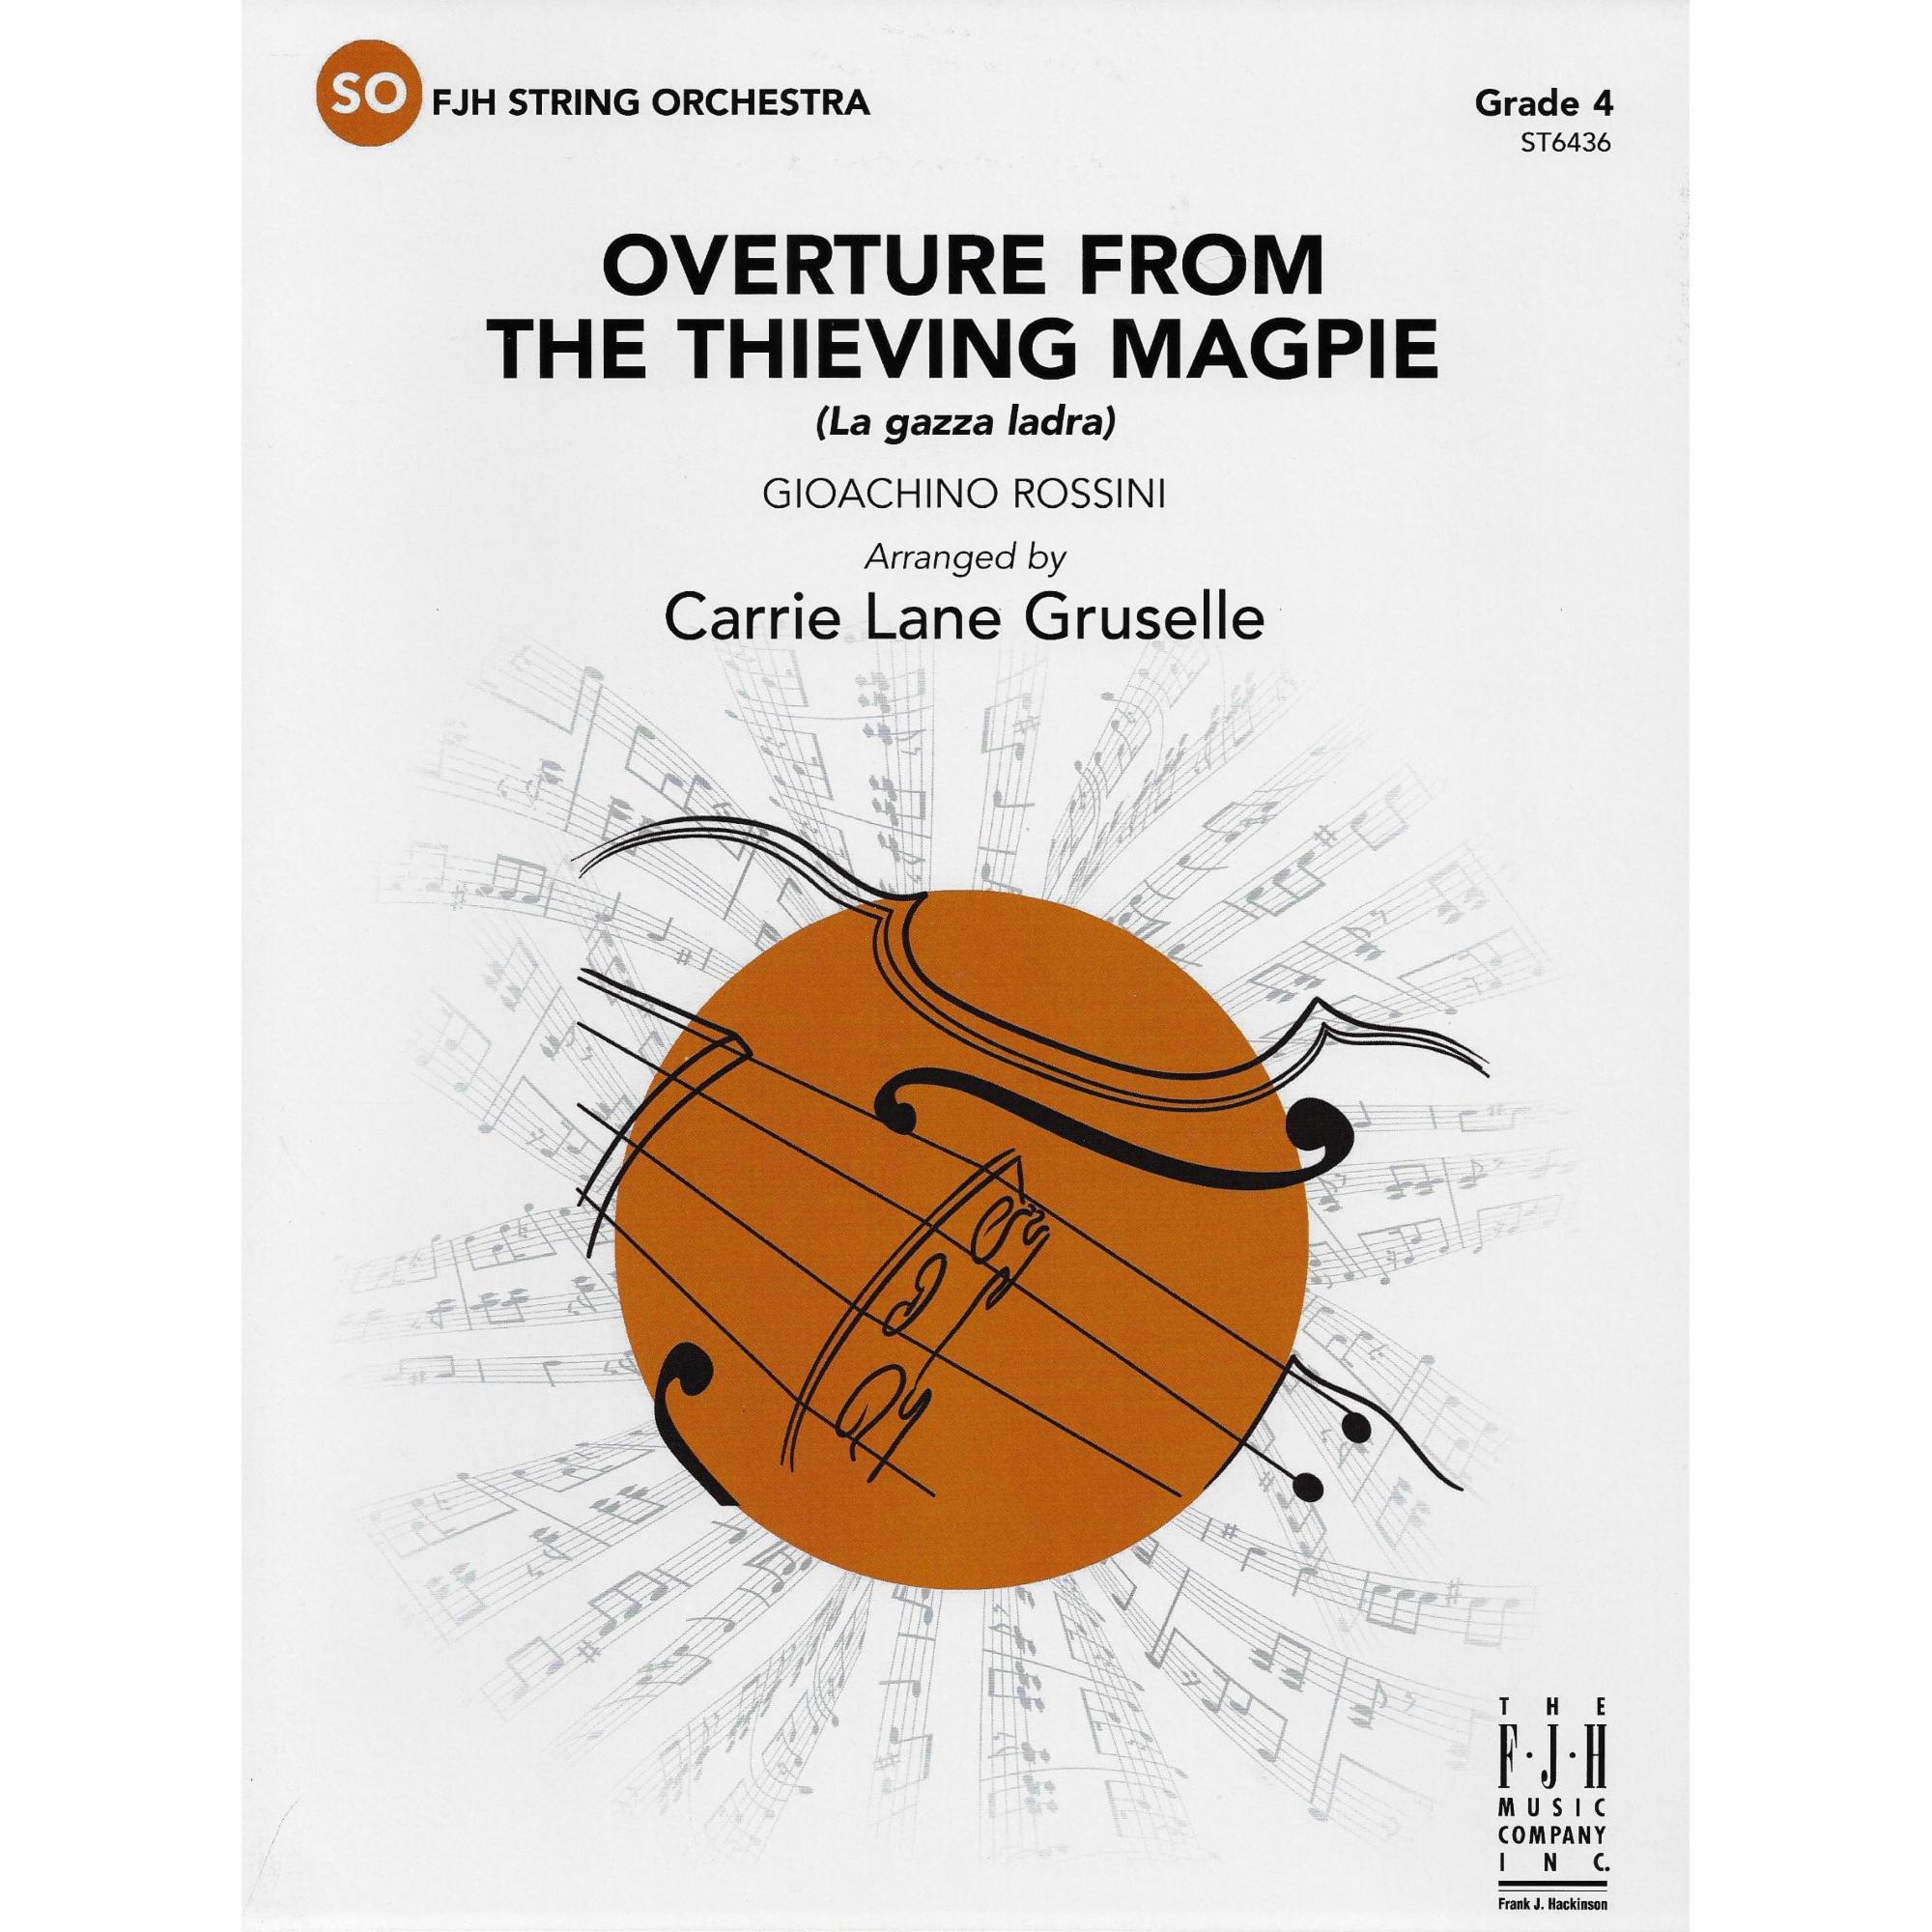 Overture from The Thieving Magpie for String Orchestra